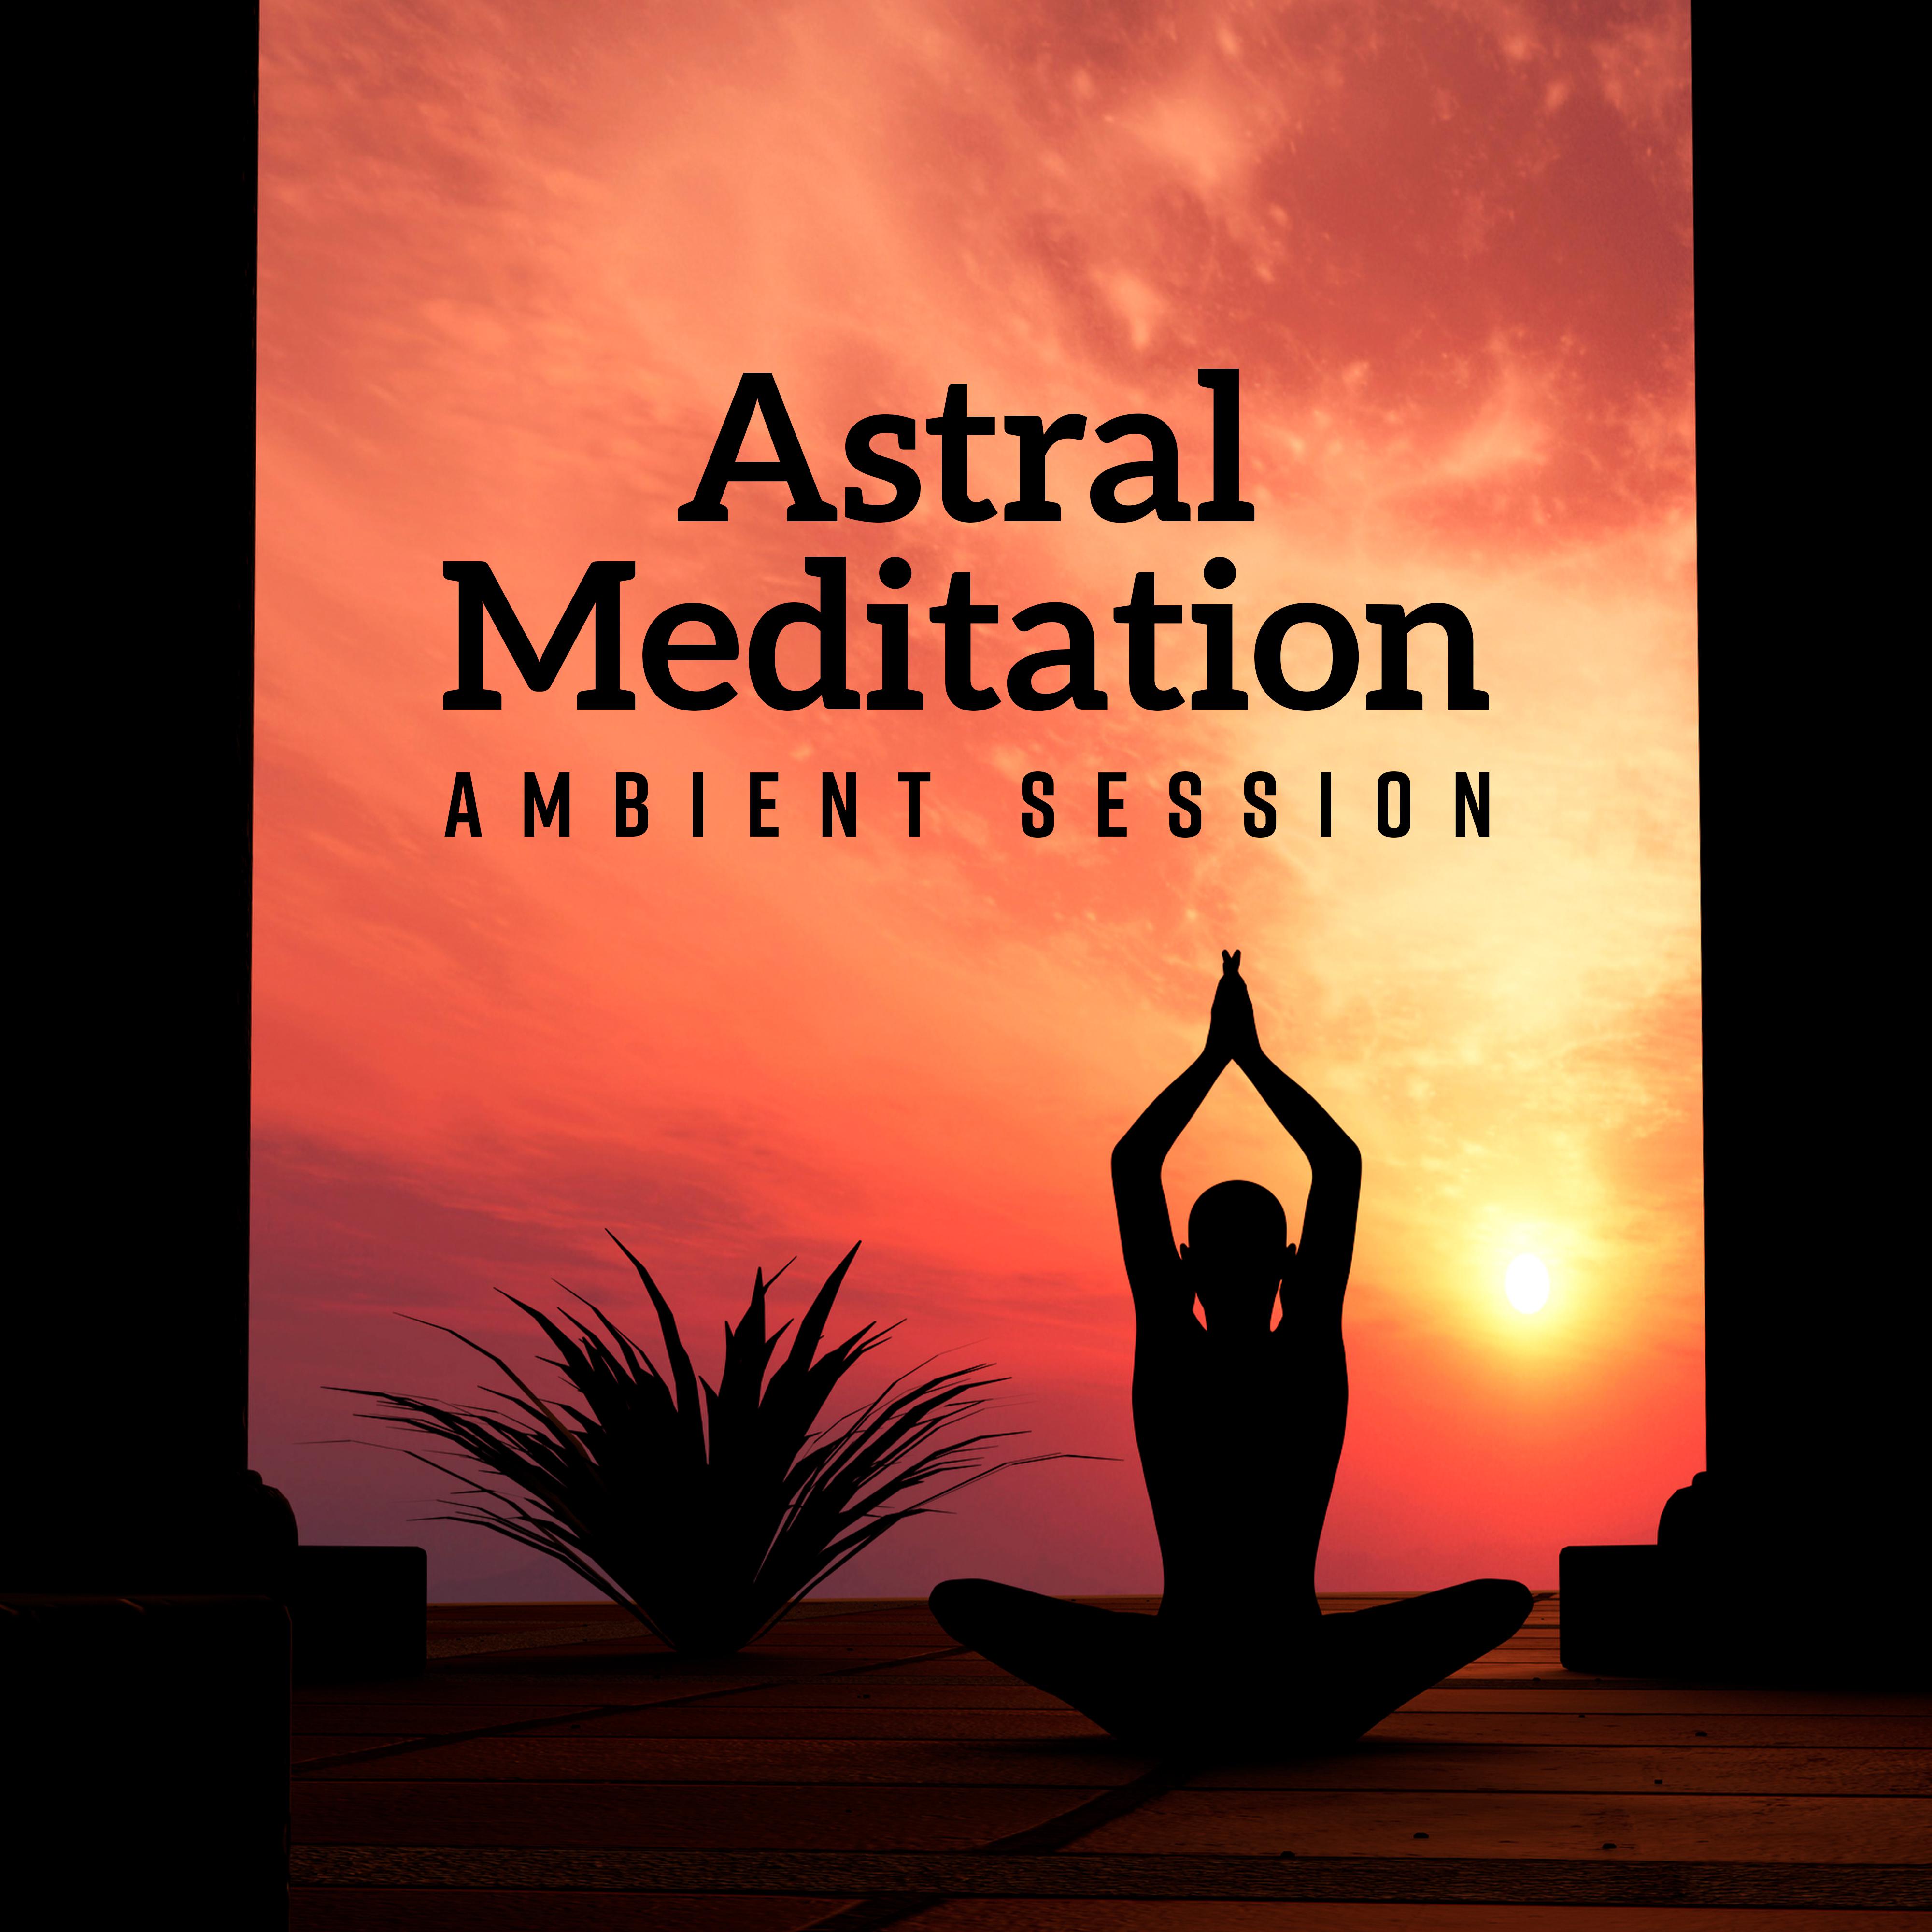 Astral Meditation Ambient Session: 2019 New Age Deep Music for Yoga & Relaxation, Spiritual Healing, Chakra Opening